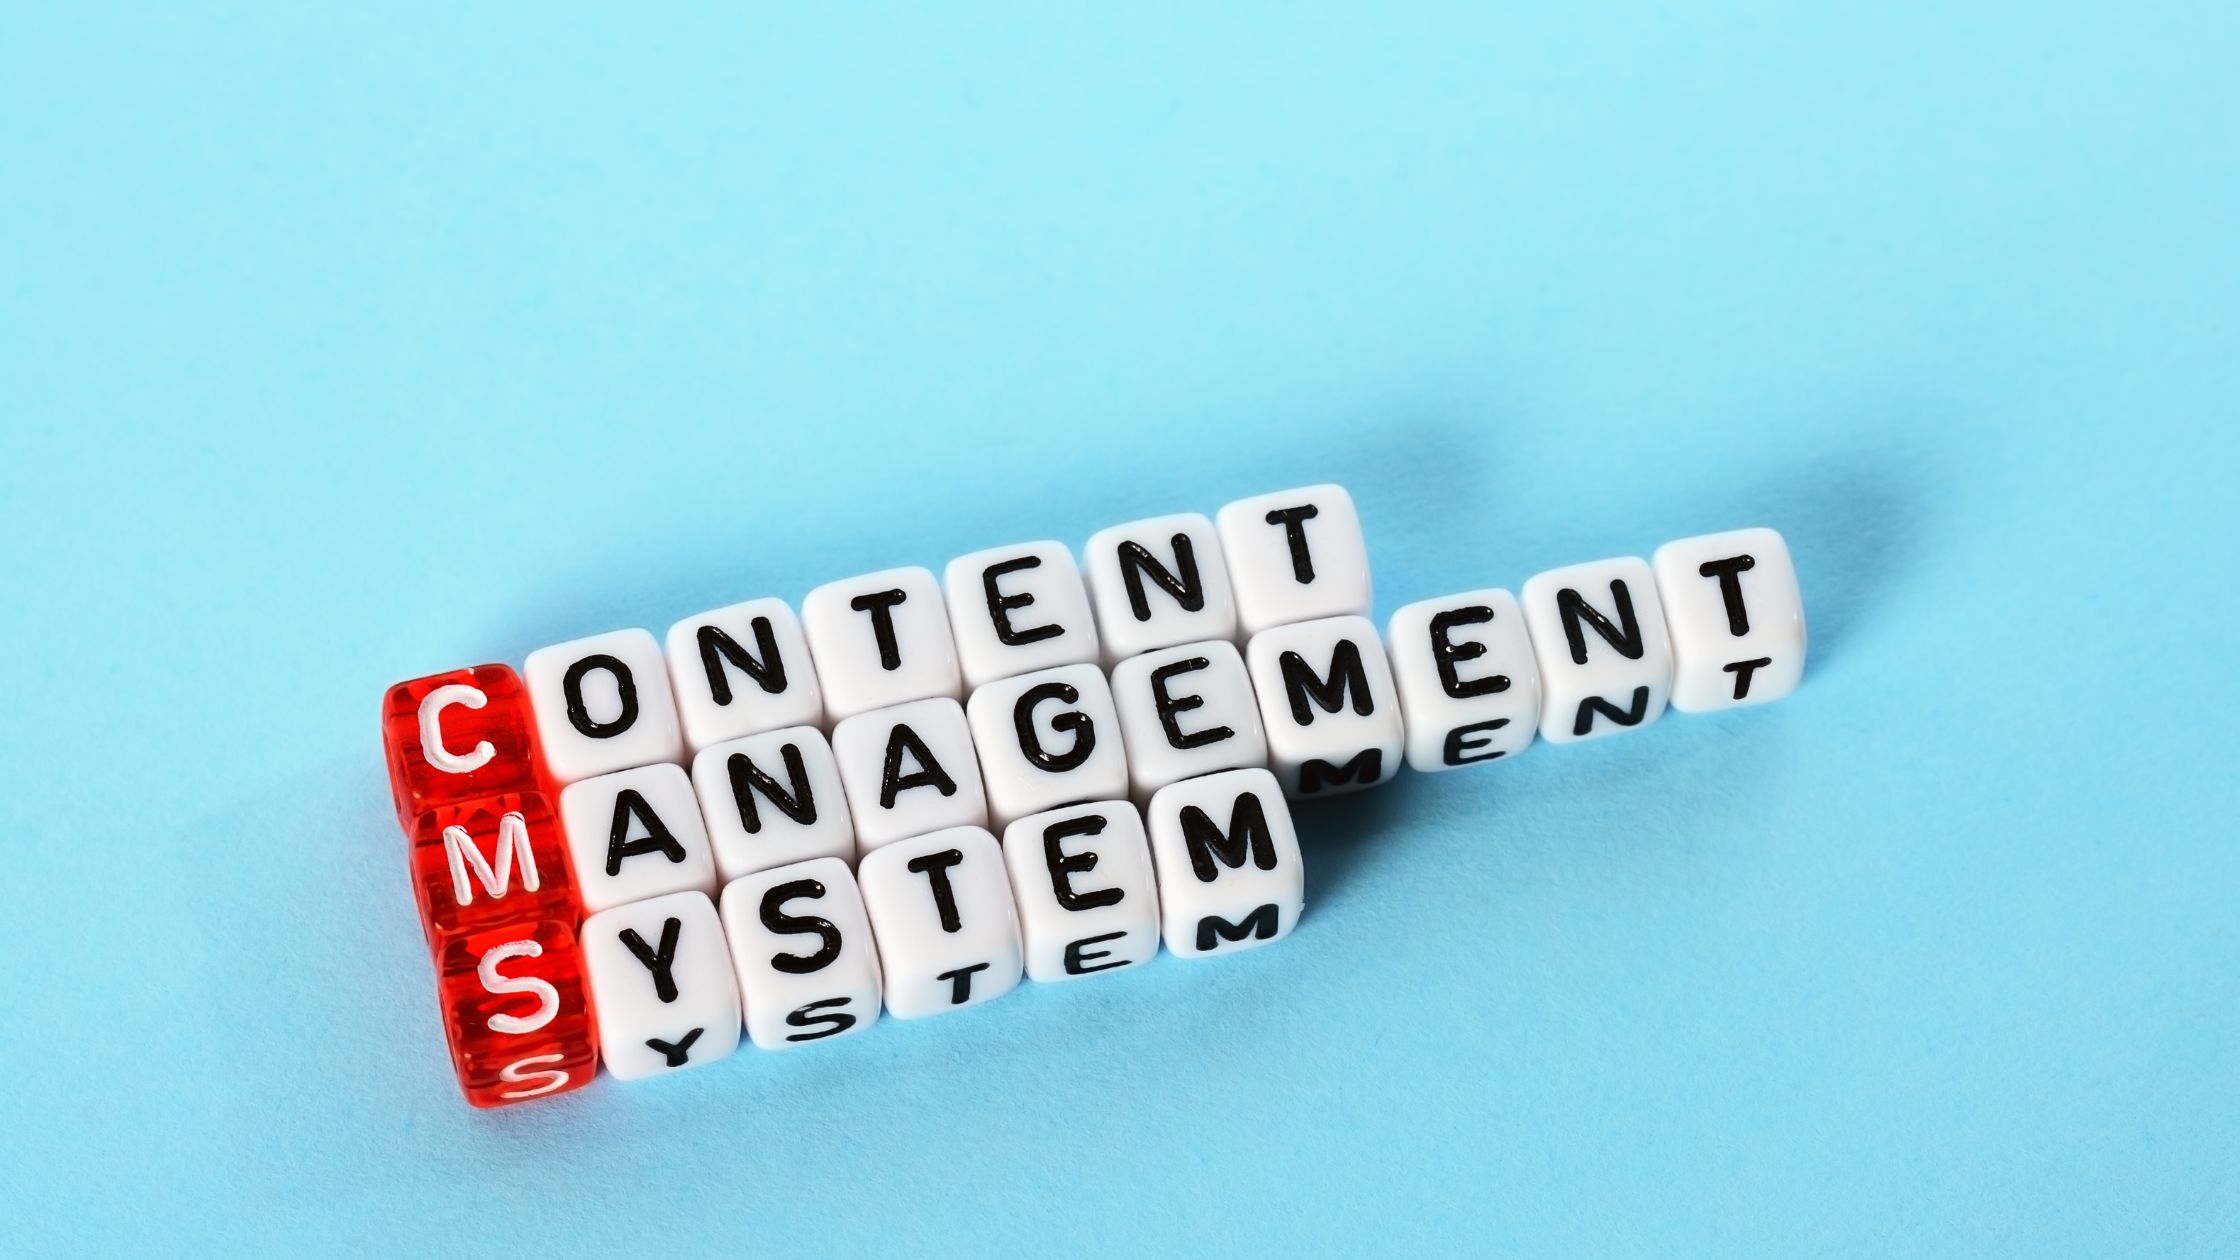 Top Marketing Tools To Boost Your Business - Content Management Tools